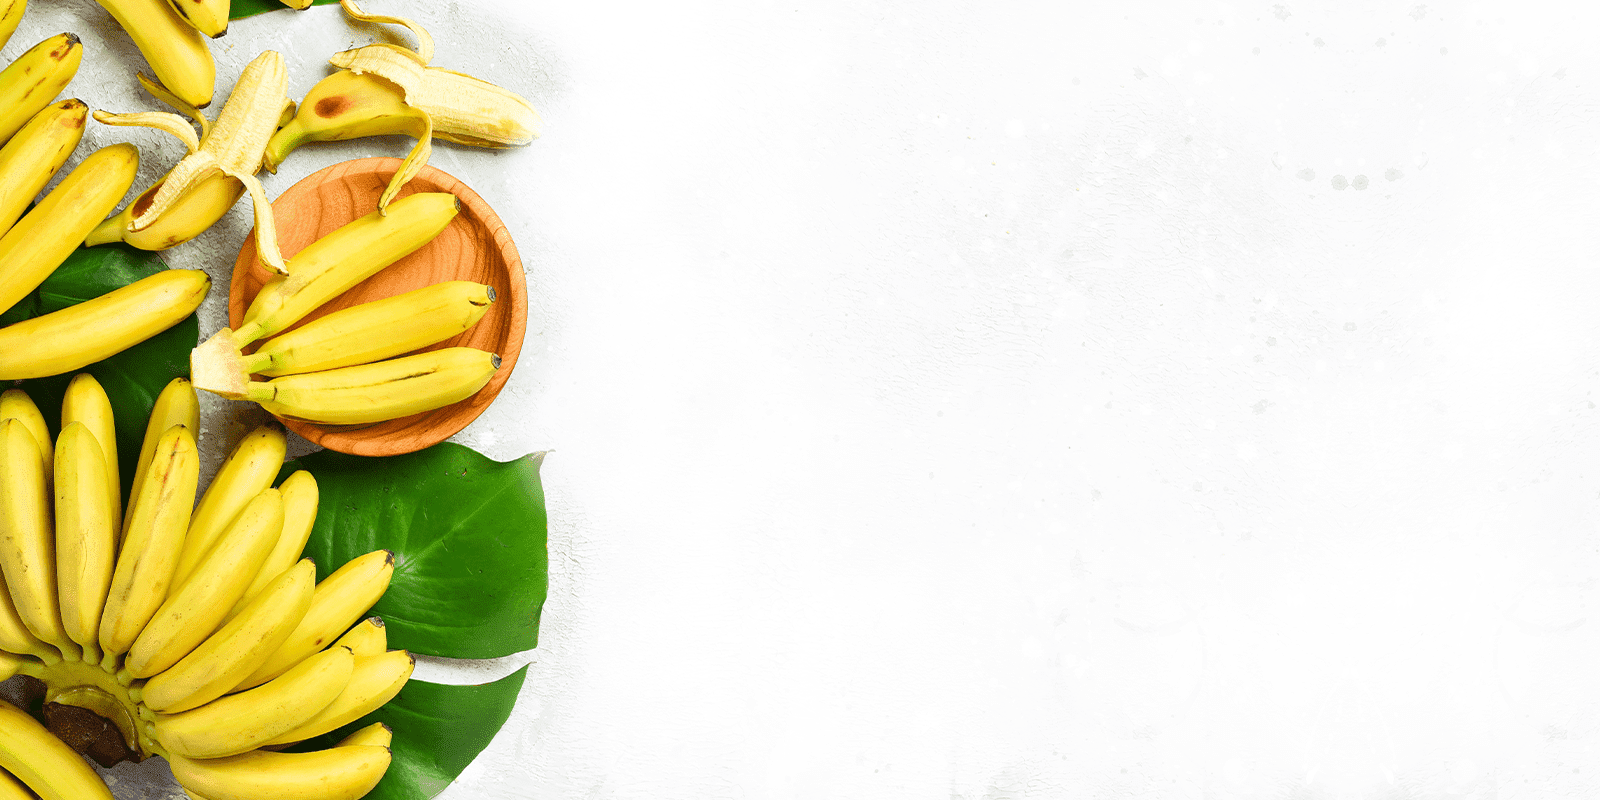 Product Banner with Bananas